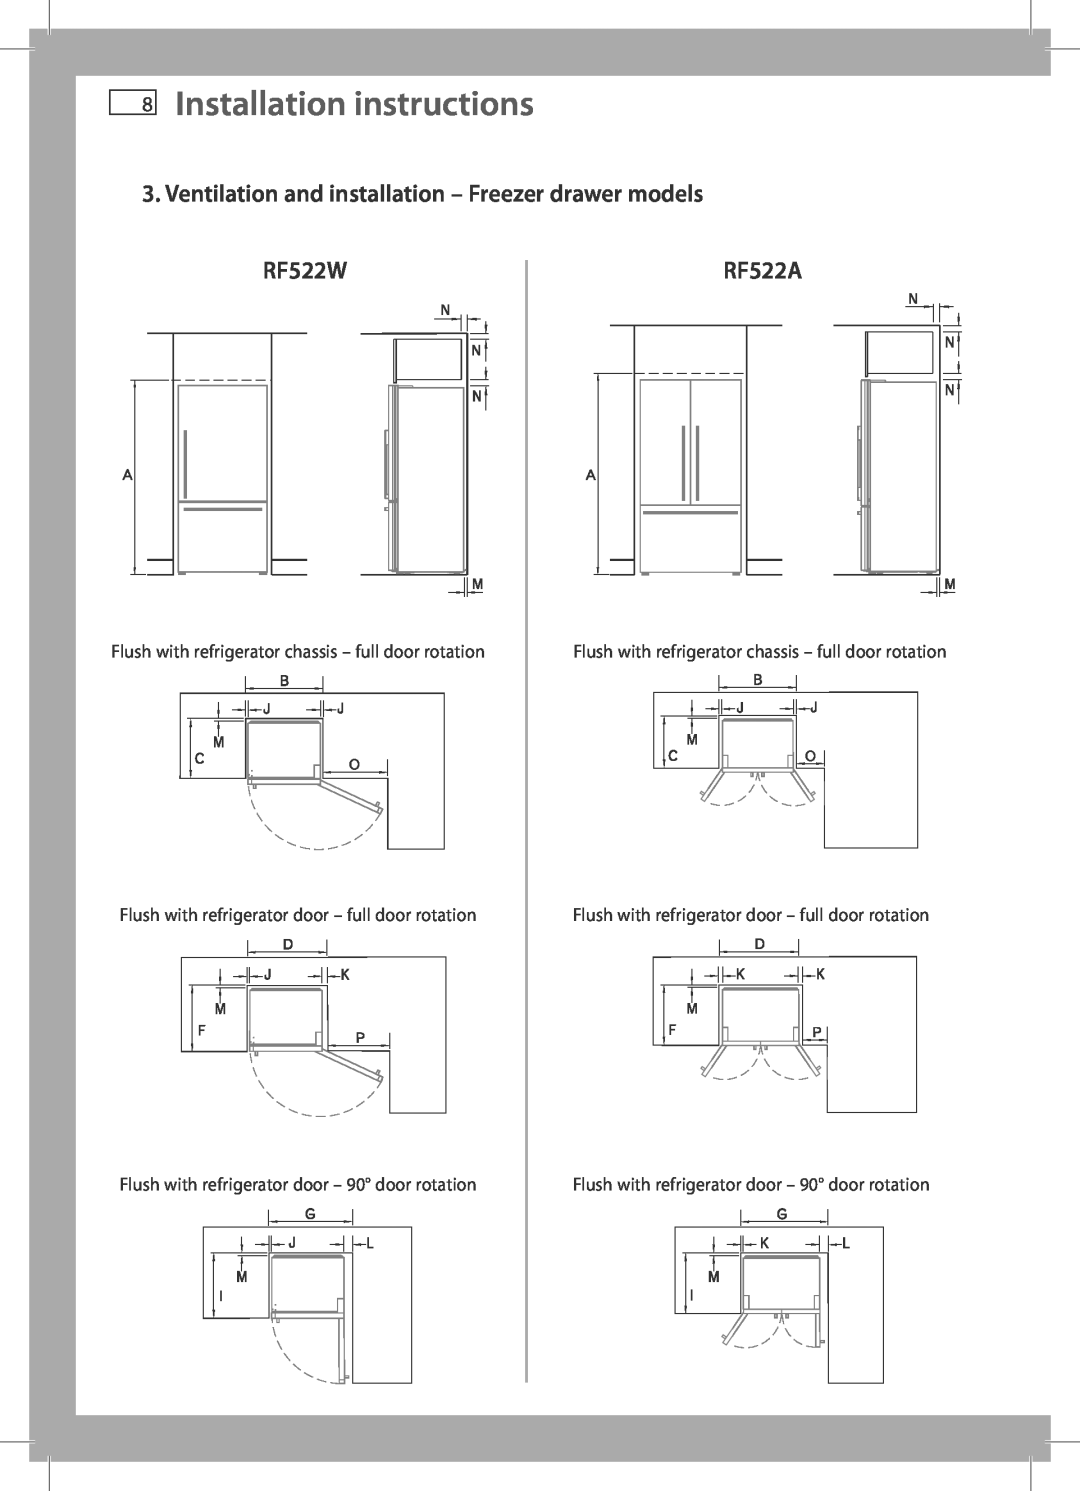 Fisher & Paykel E402B Ventilation and installation - Freezer drawer models, RF522W, RF522A, Installation instructions 